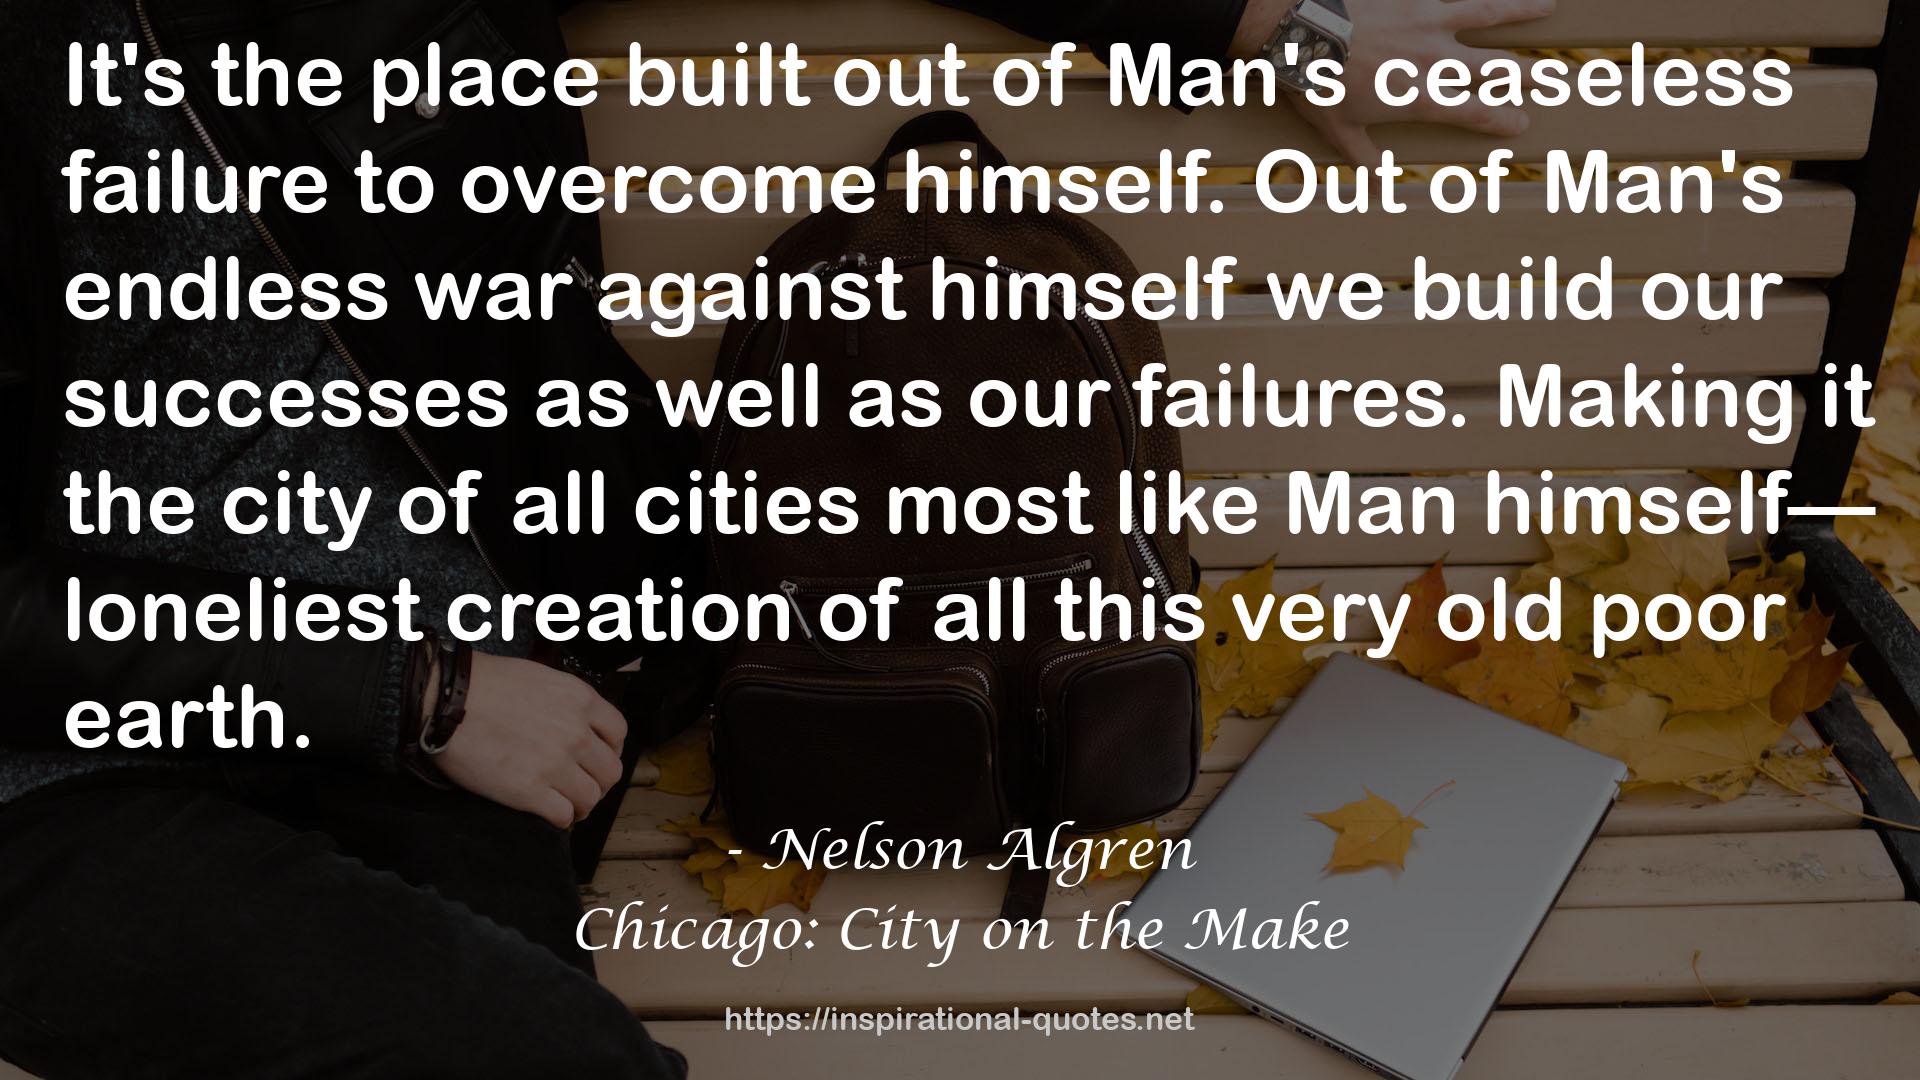 Chicago: City on the Make QUOTES